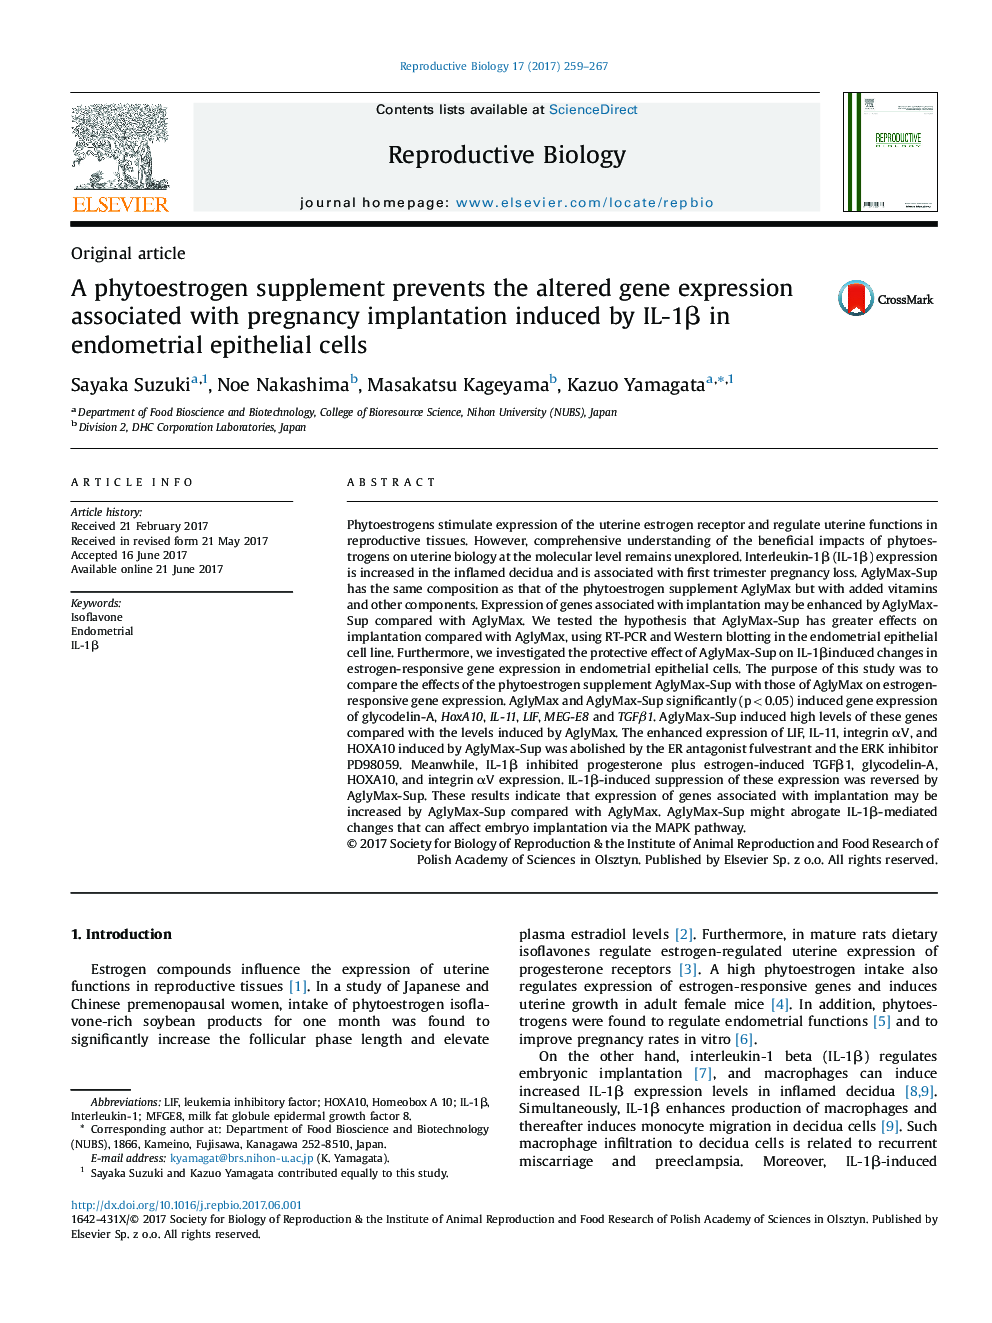 Original articleA phytoestrogen supplement prevents the altered gene expression associated with pregnancy implantation induced by IL-1Î² in endometrial epithelial cells